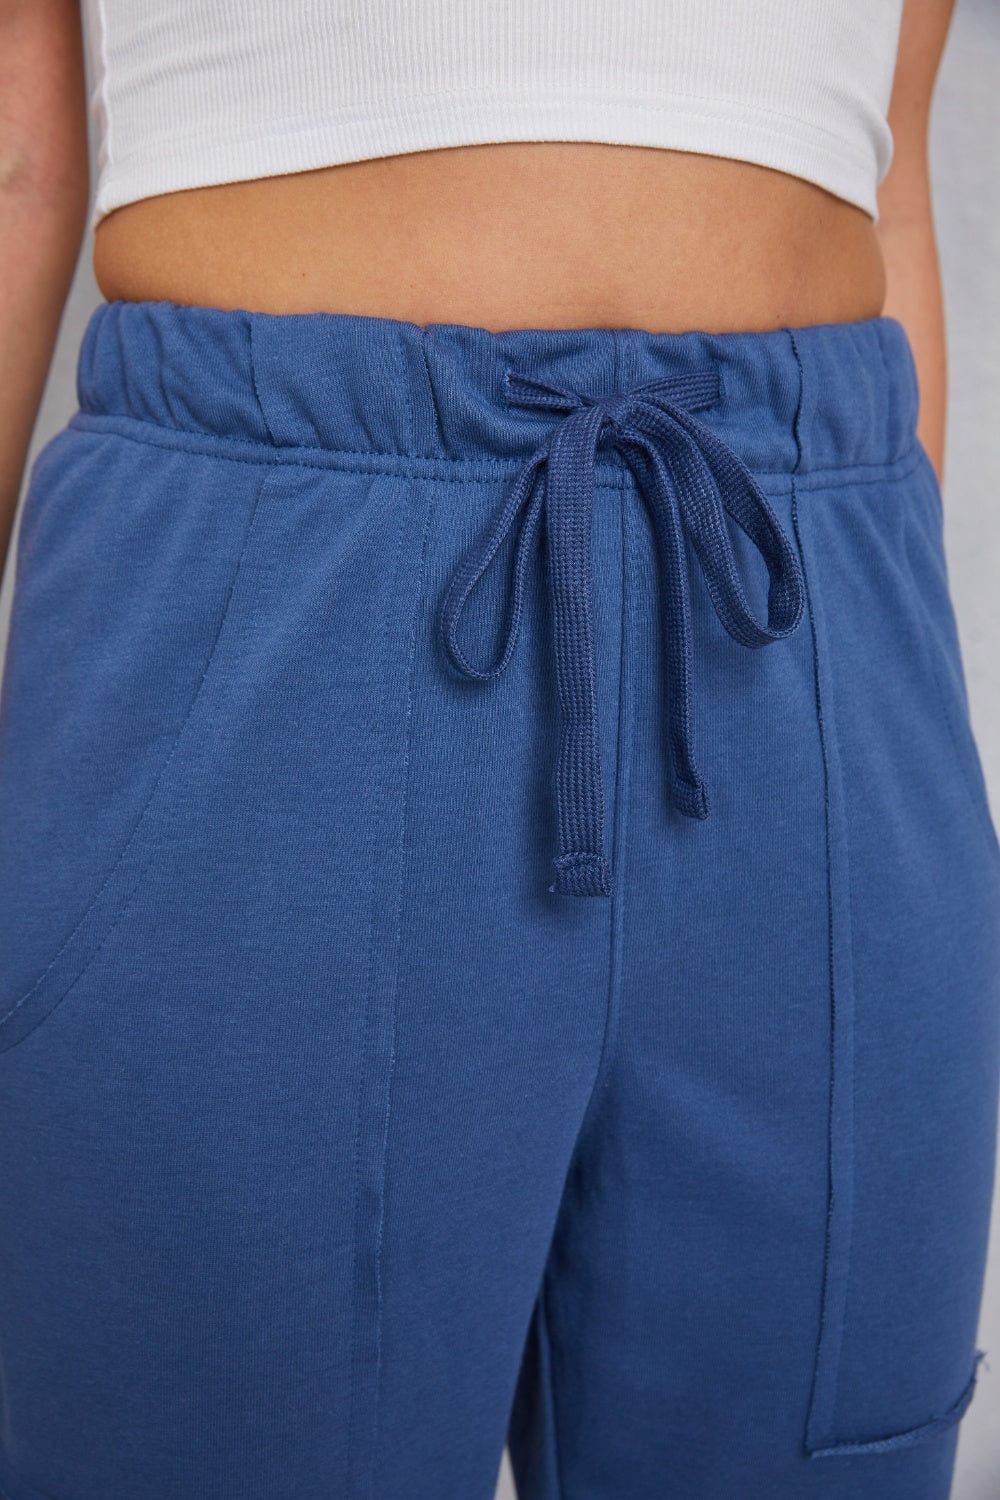 The802Gypsy bottoms/sweatpants GYPSY-Drawstring Joggers with Pockets